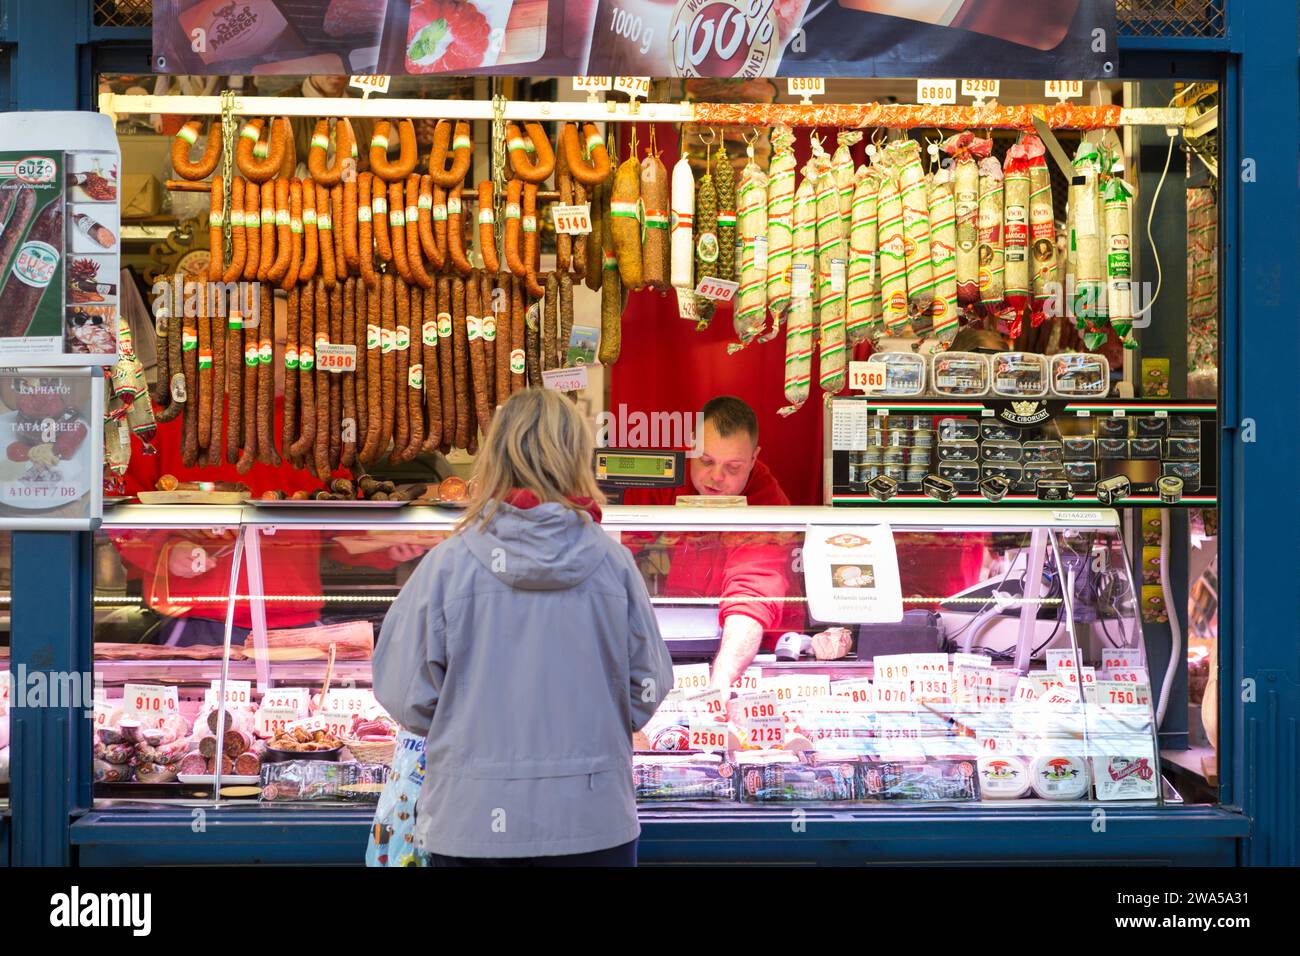 Hungary, Budapest, a local being served at a traditional meat stall in the Central indoor City Market. Stock Photo